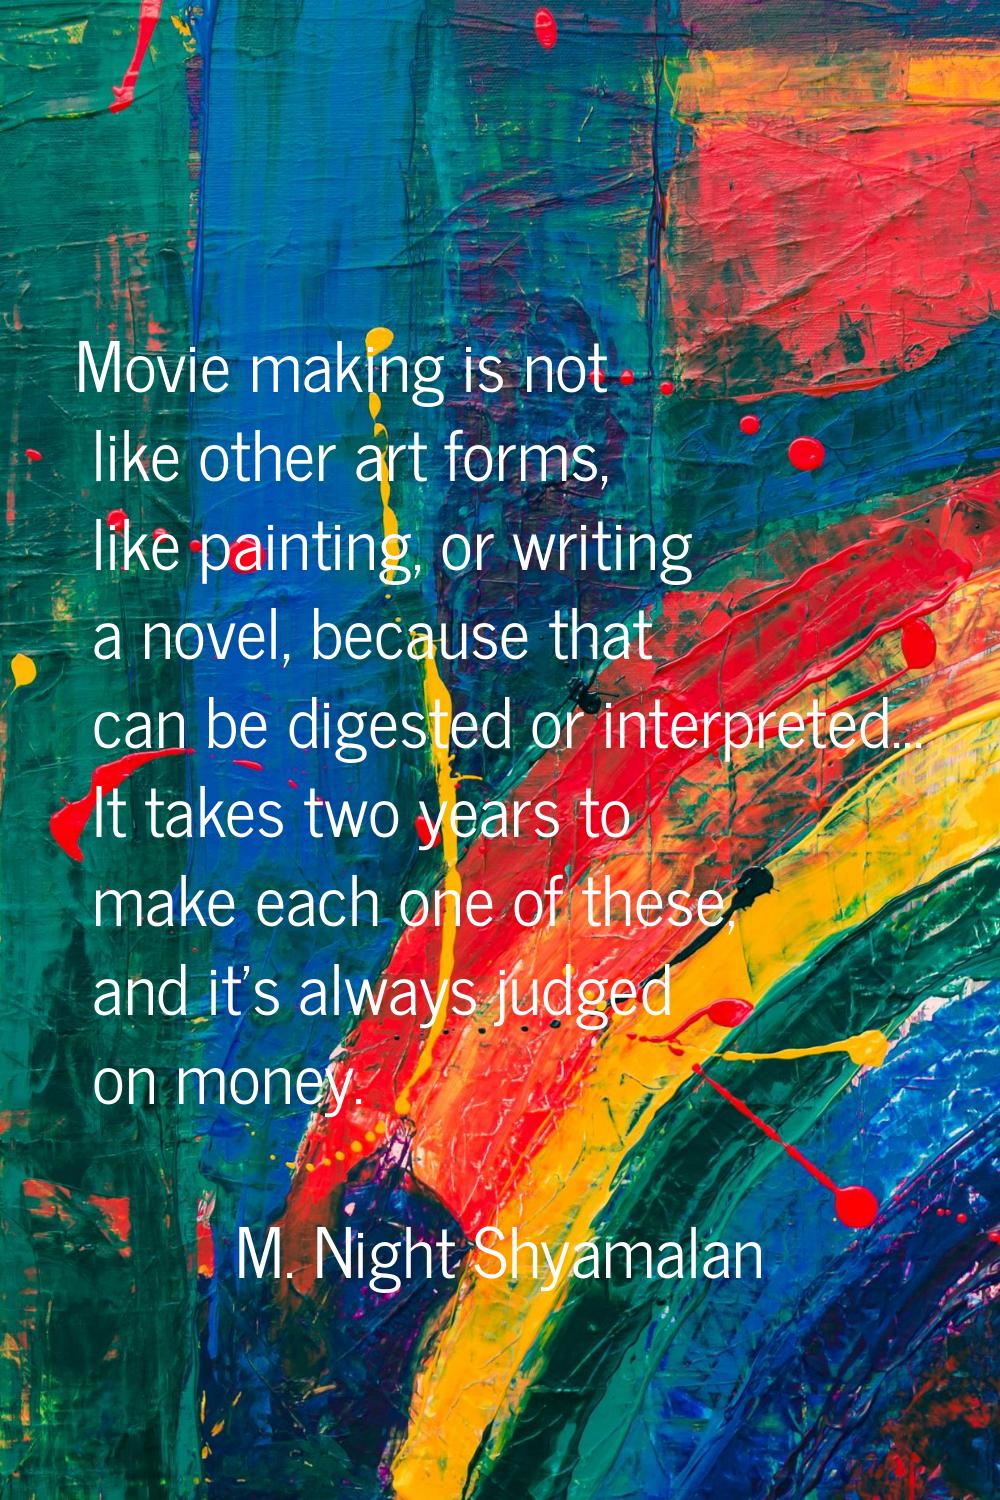 Movie making is not like other art forms, like painting, or writing a novel, because that can be di